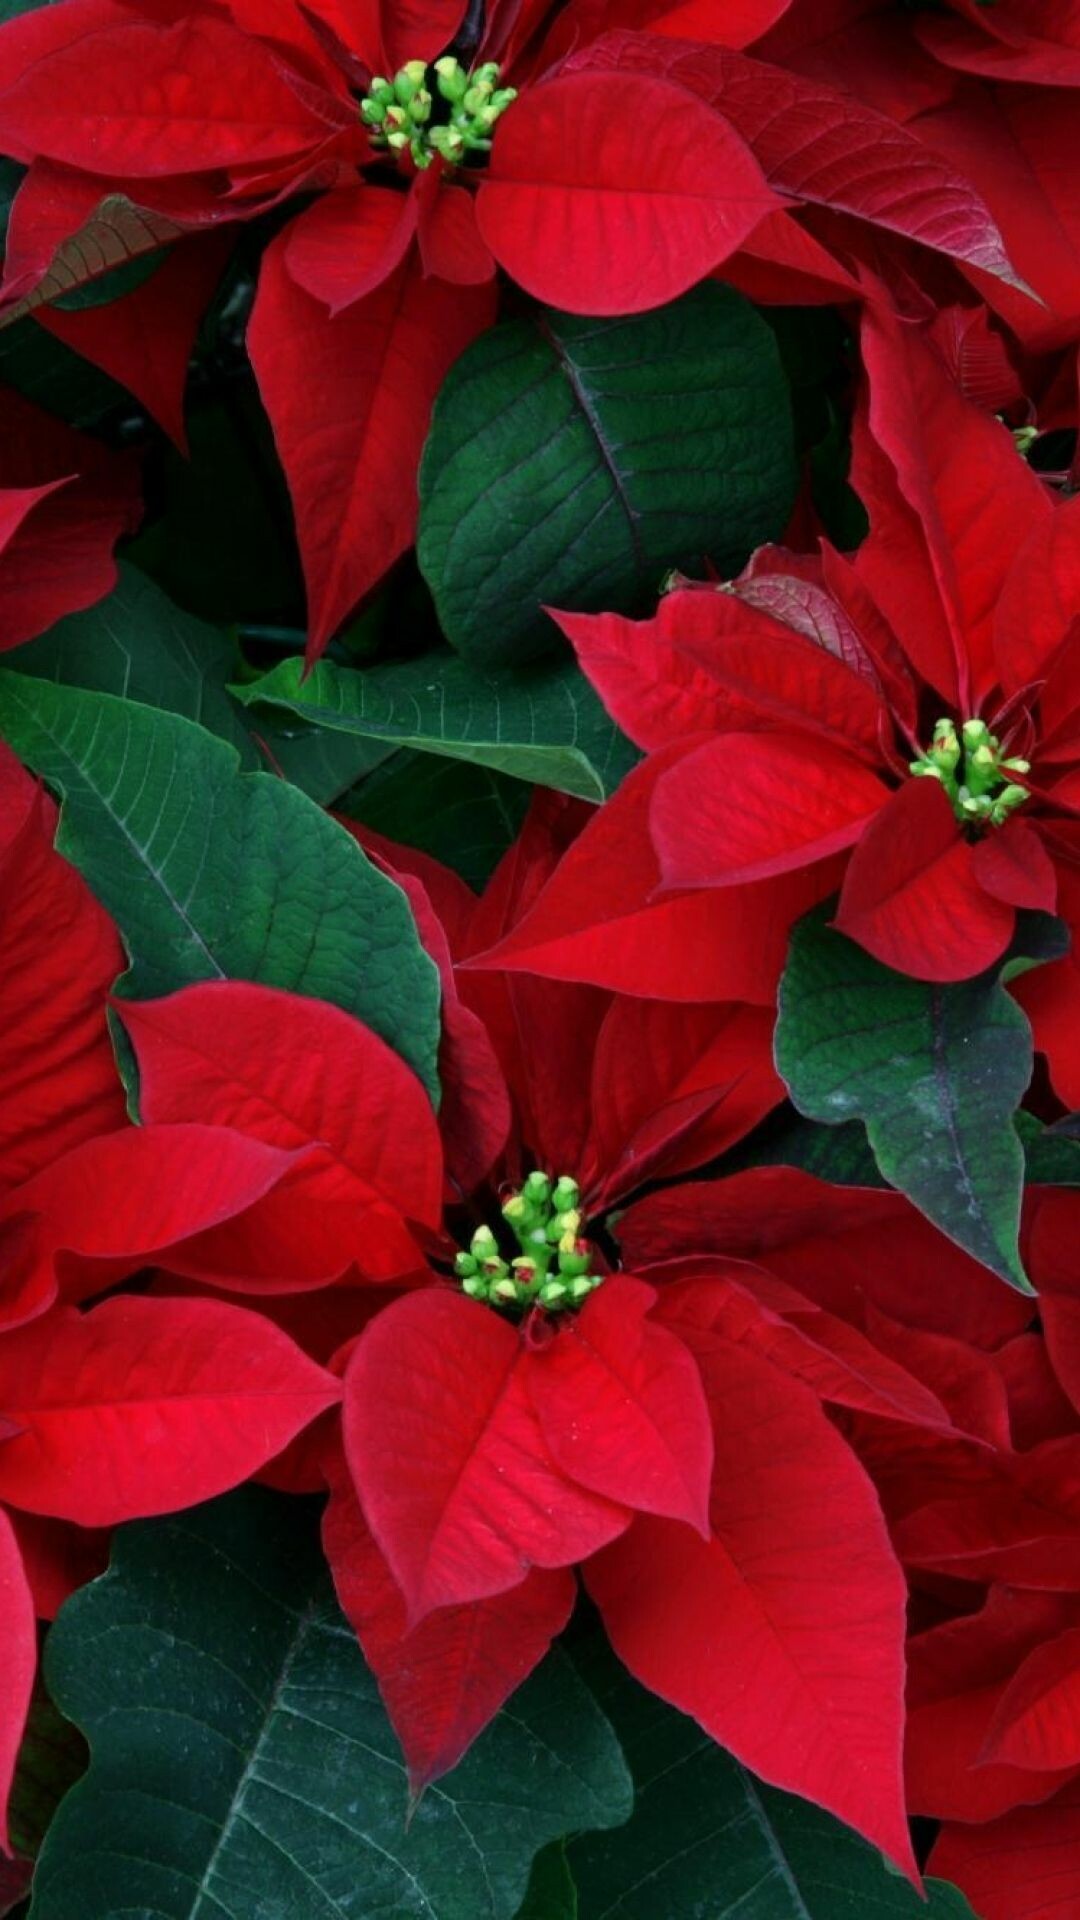 Poinsettia: Poinsettias come in colors like the traditional red, white, pink, burgundy, marbled and speckled. 1080x1920 Full HD Background.